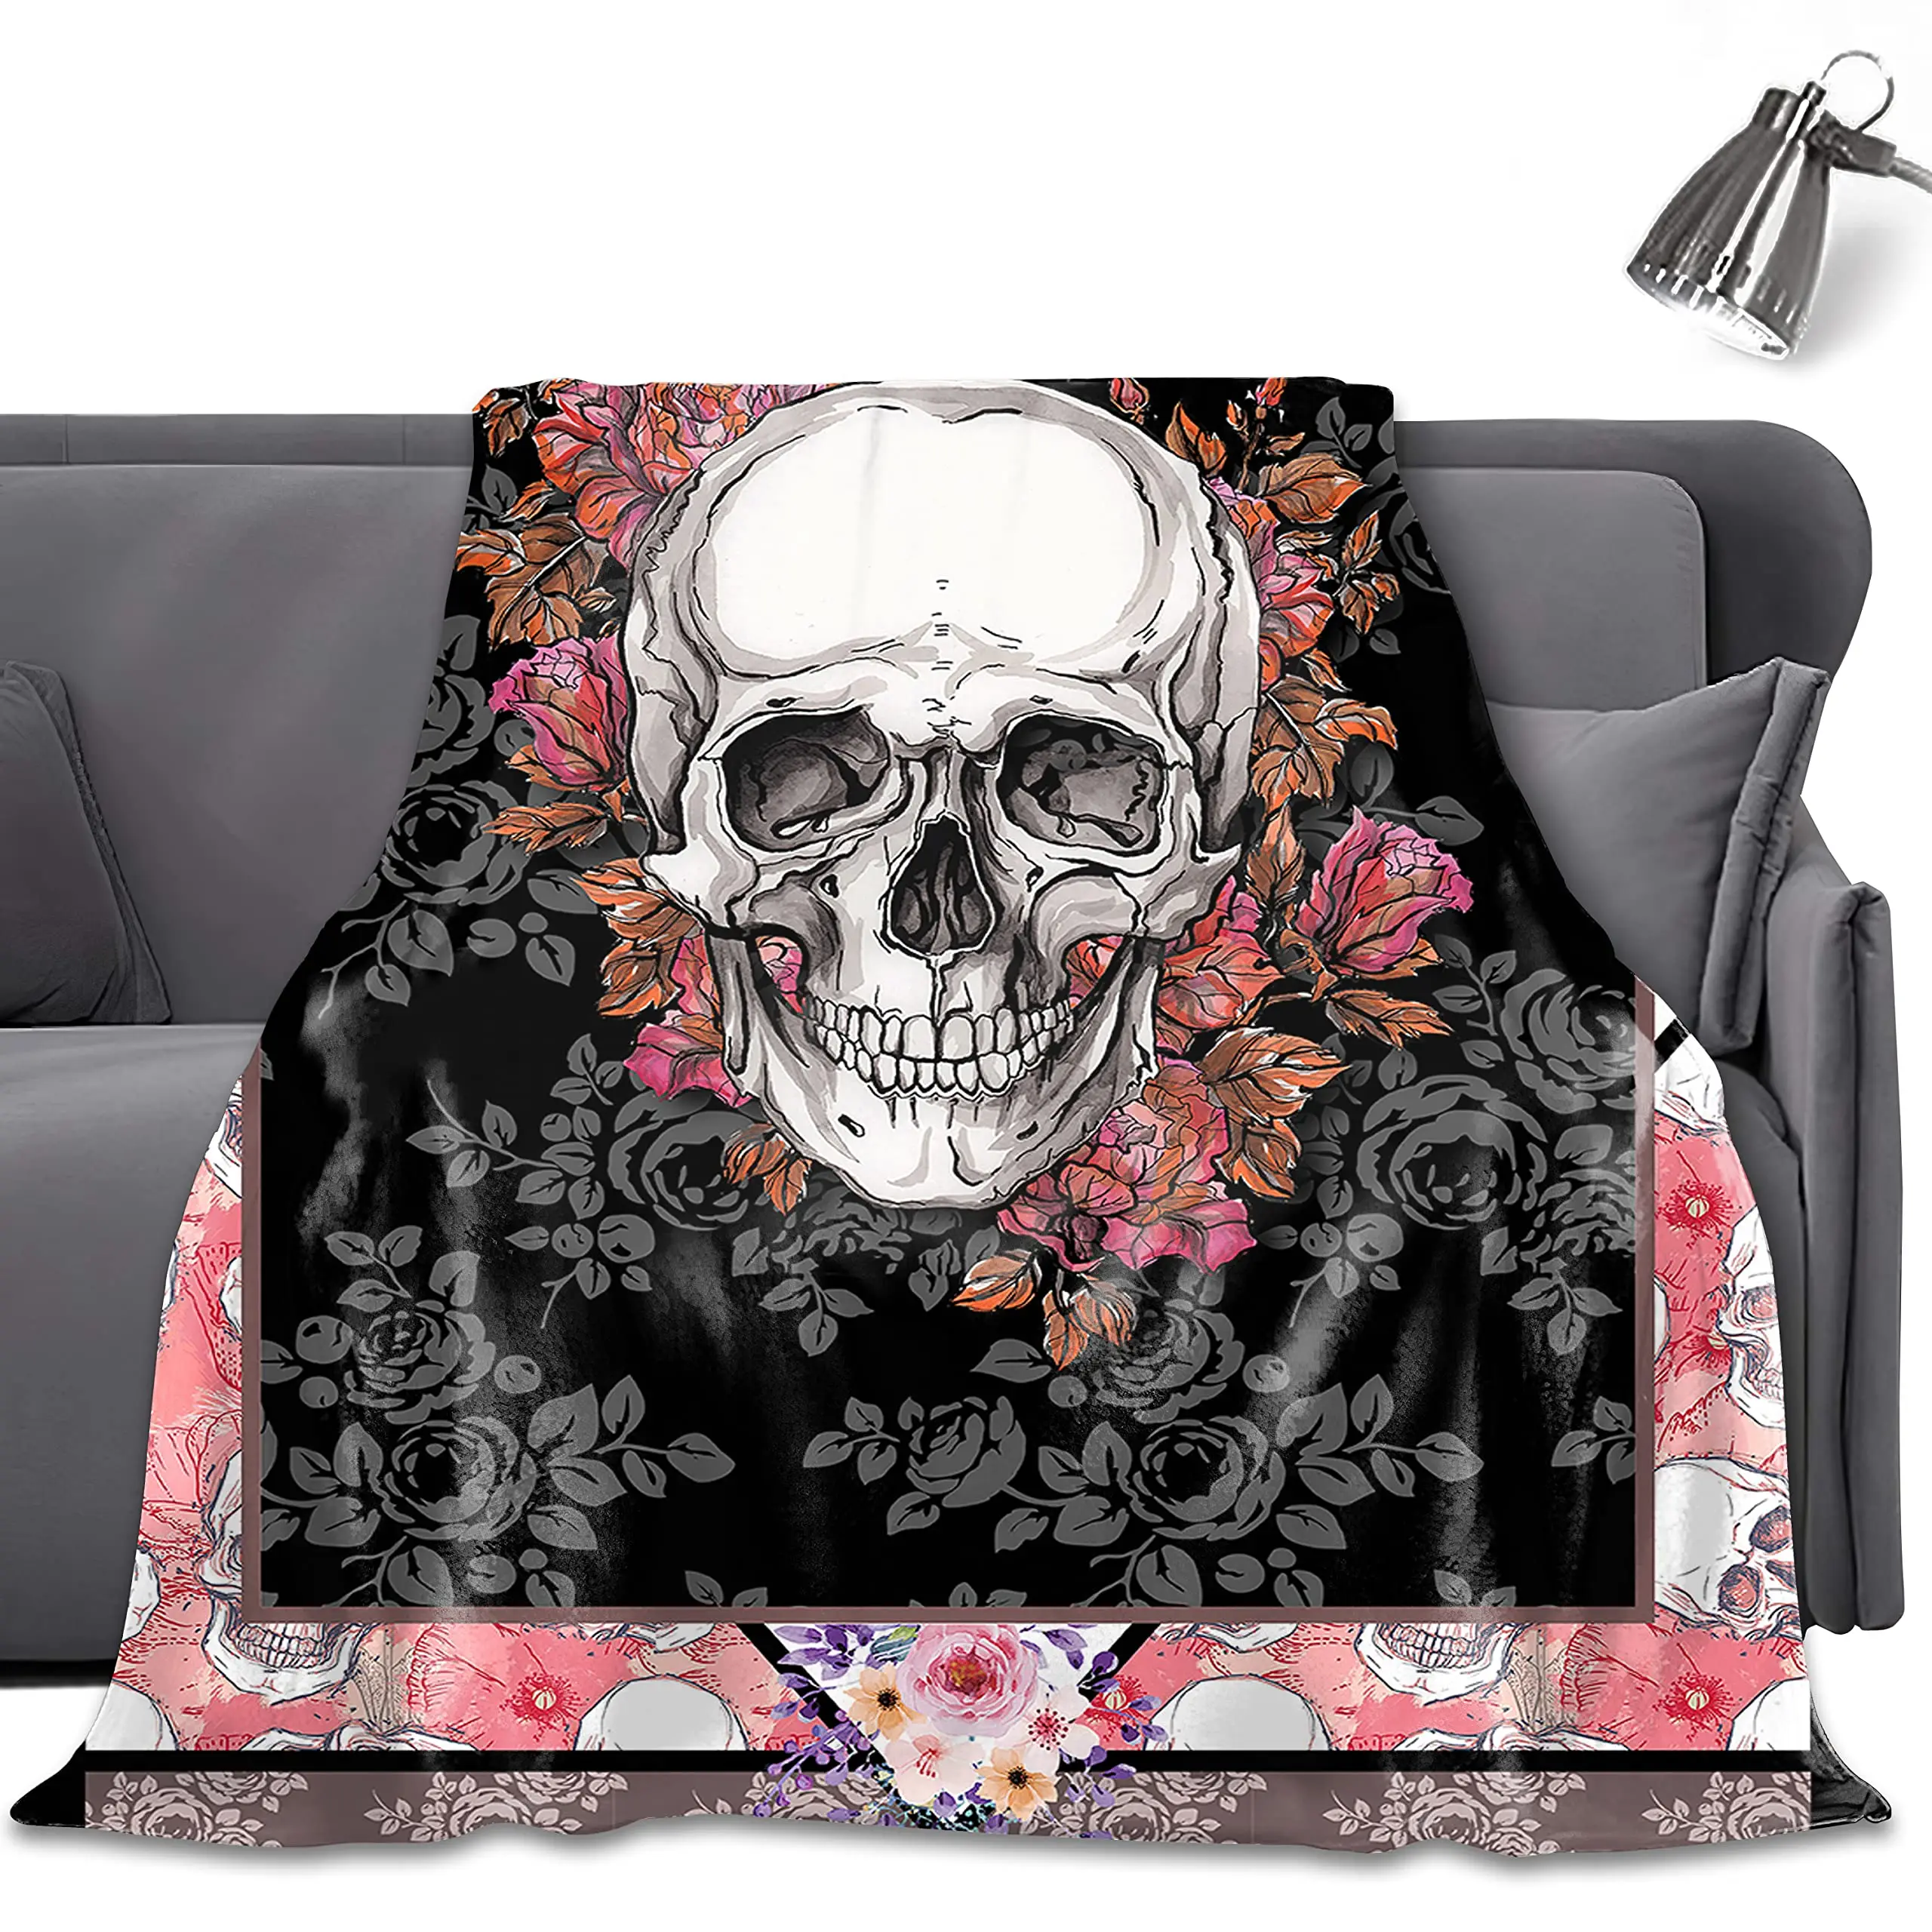 

Skull Theme Flannel Throw Blanket Comfort Soft Cozy Air Conditioning for Living Room Couch Blanket King Queen Size Warmth Super